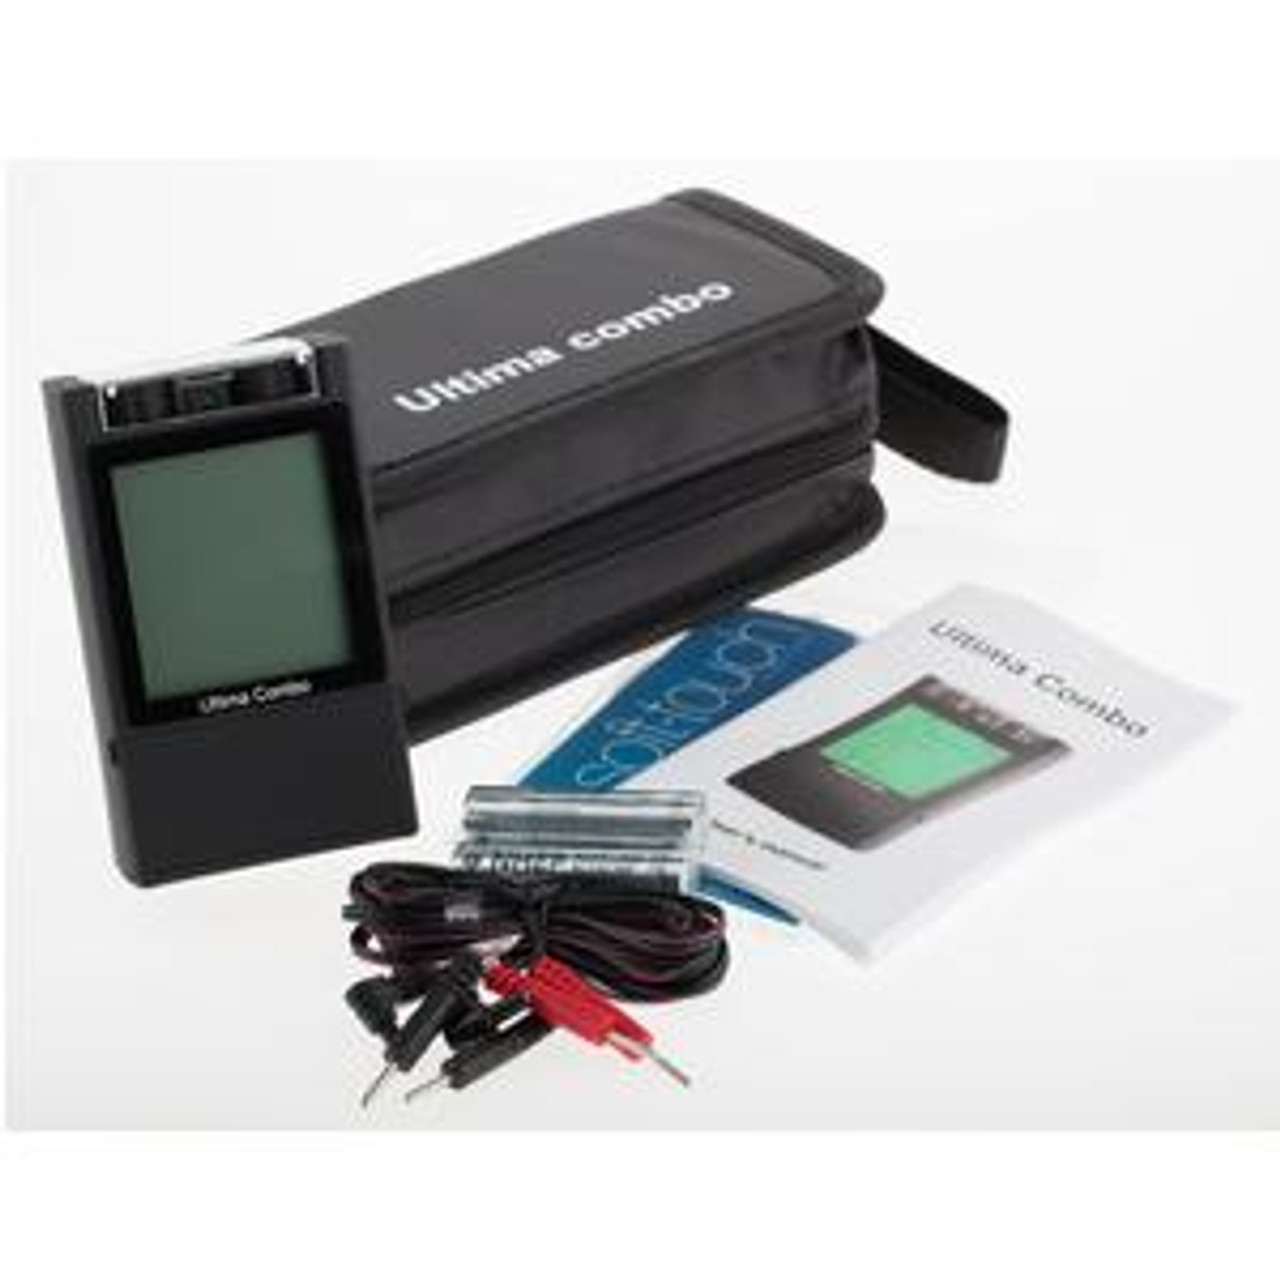 Buy Pain Management Ultima Combo Digital TENS and EMS Device